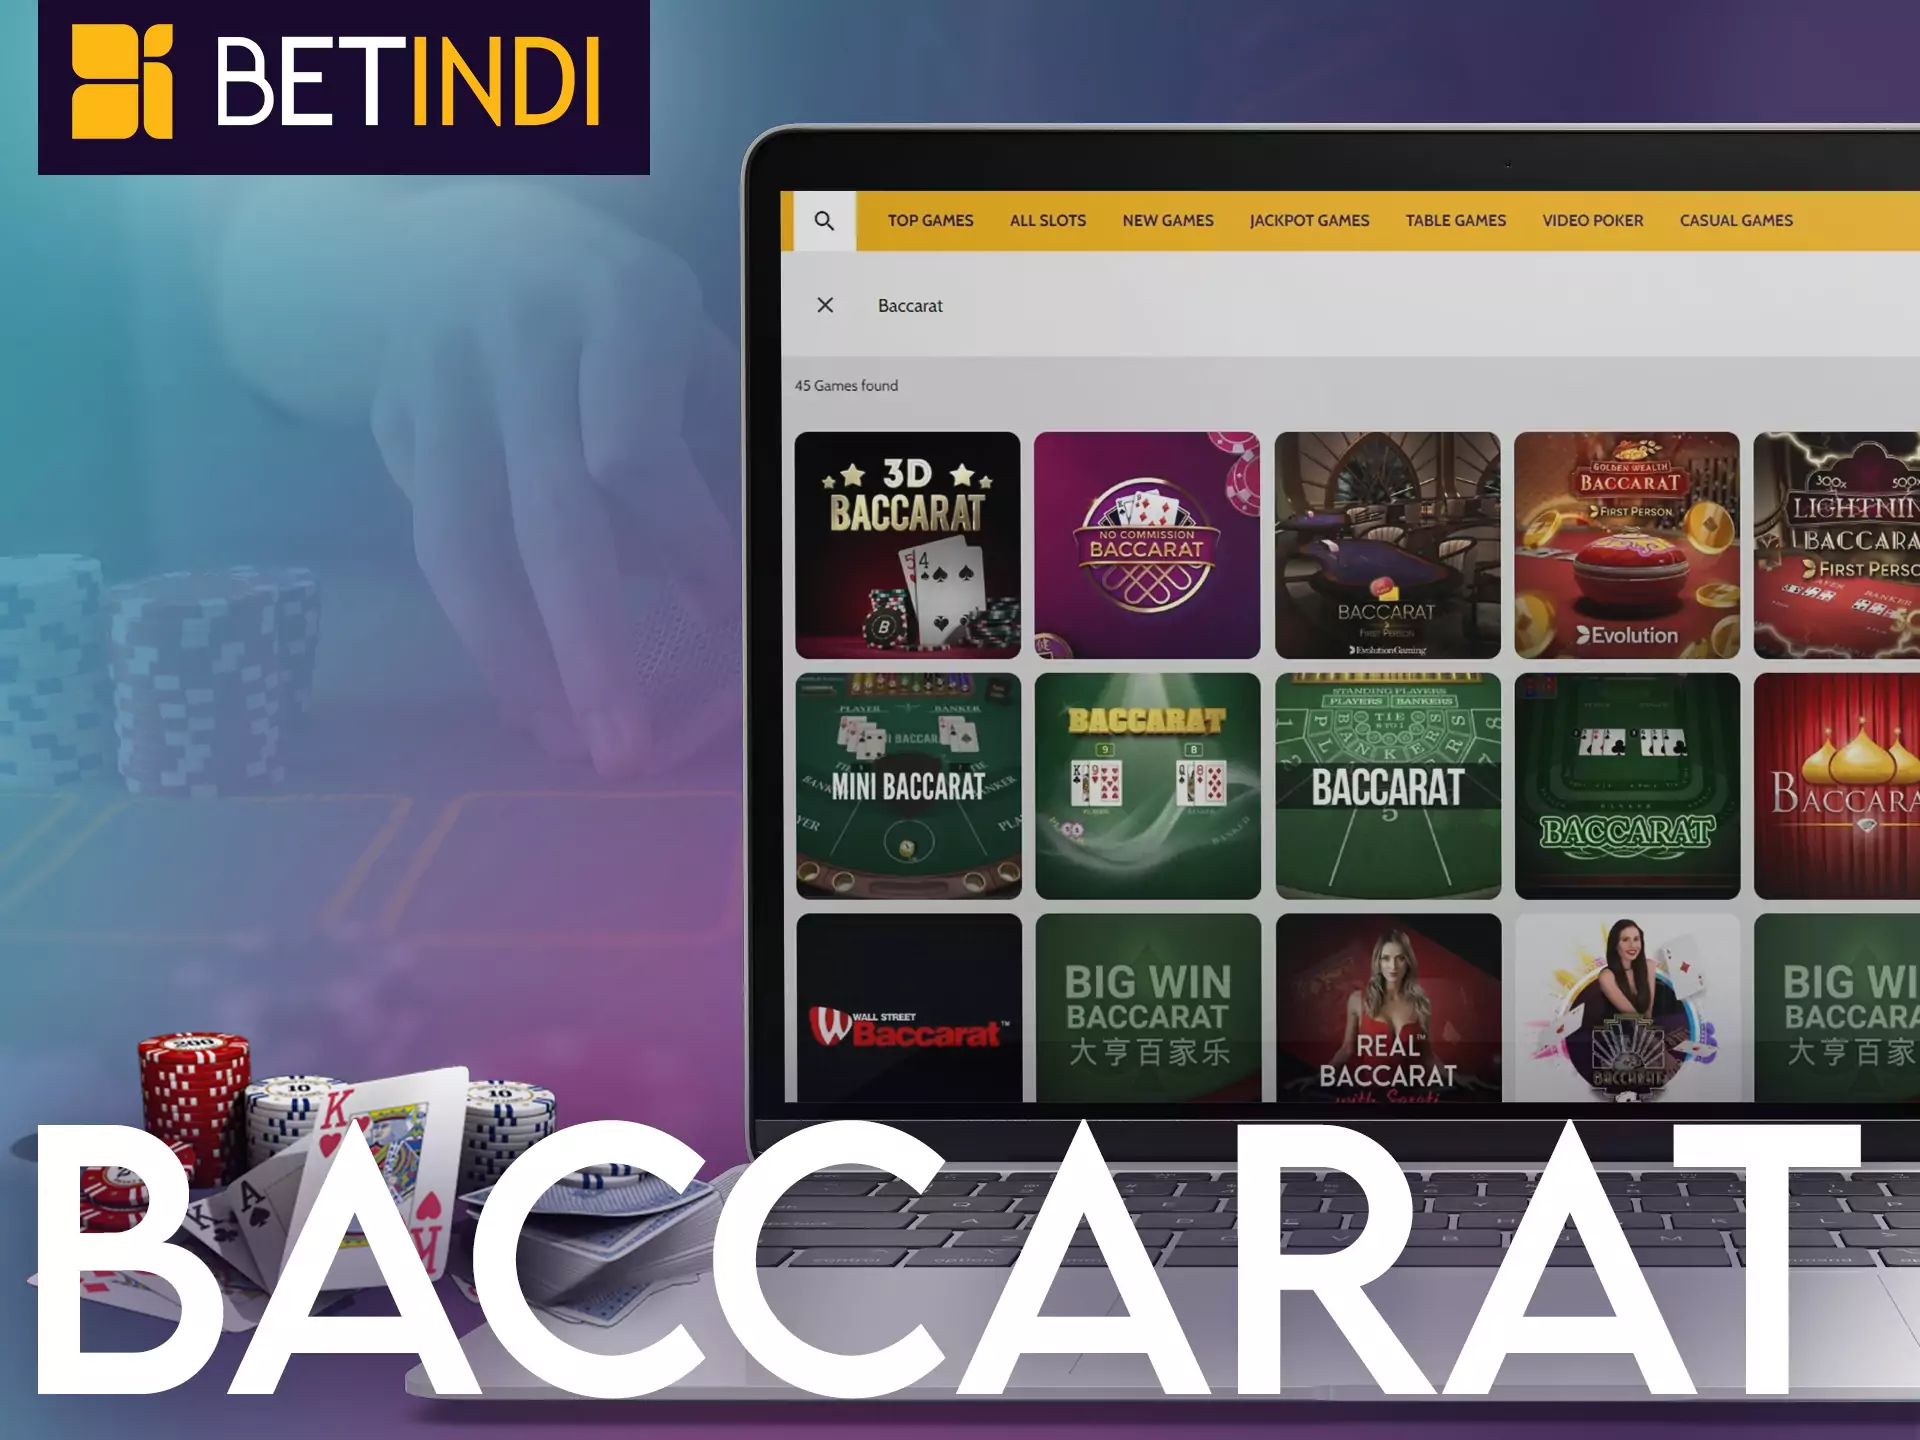 Try to play baccarat at Betindi Casino.